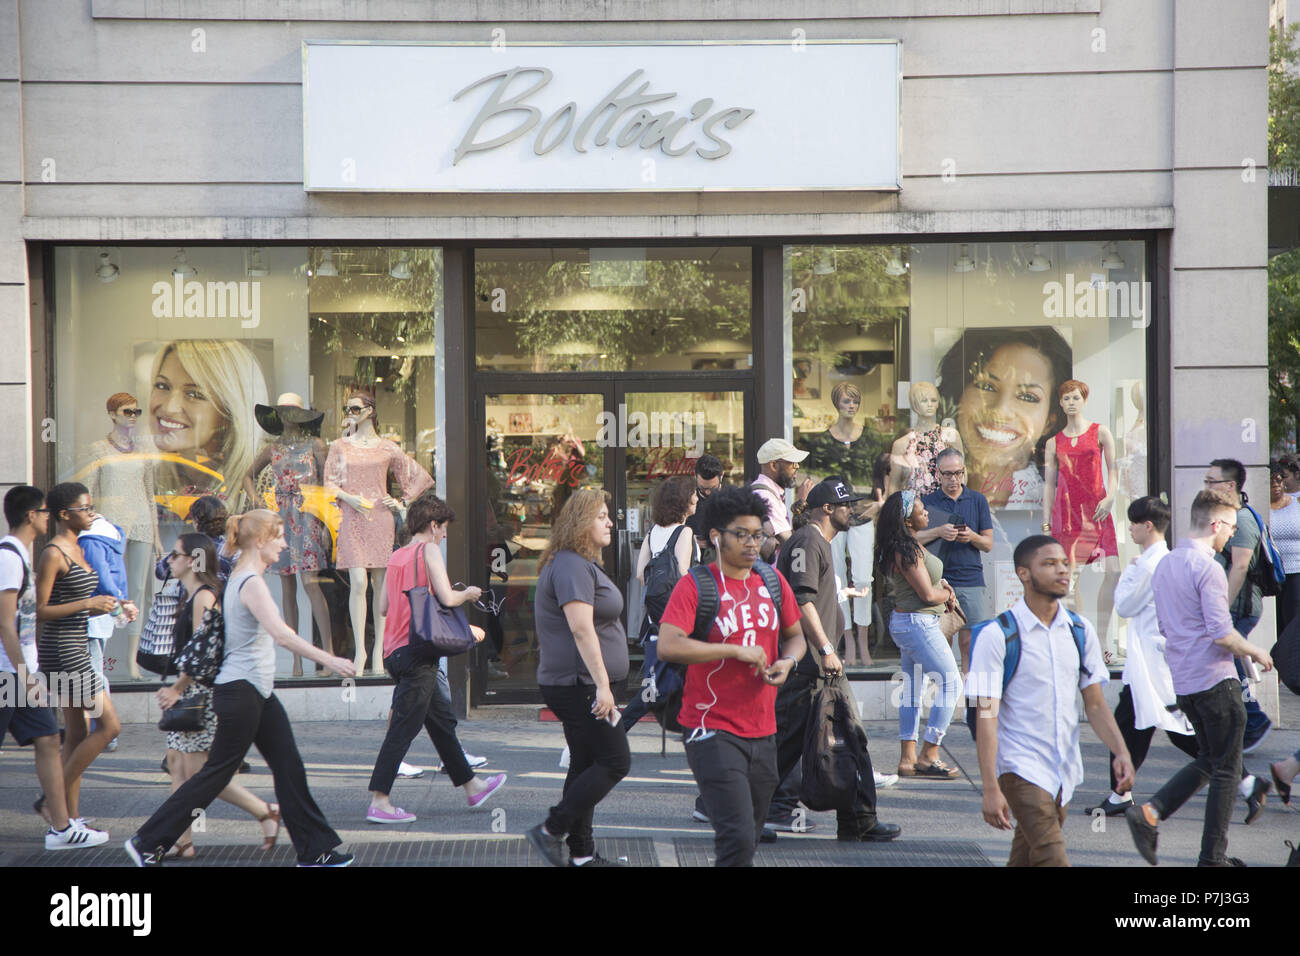 Sidewalk is always crowded at Bolton's at Union Square at 14th Street, NY City. Stock Photo